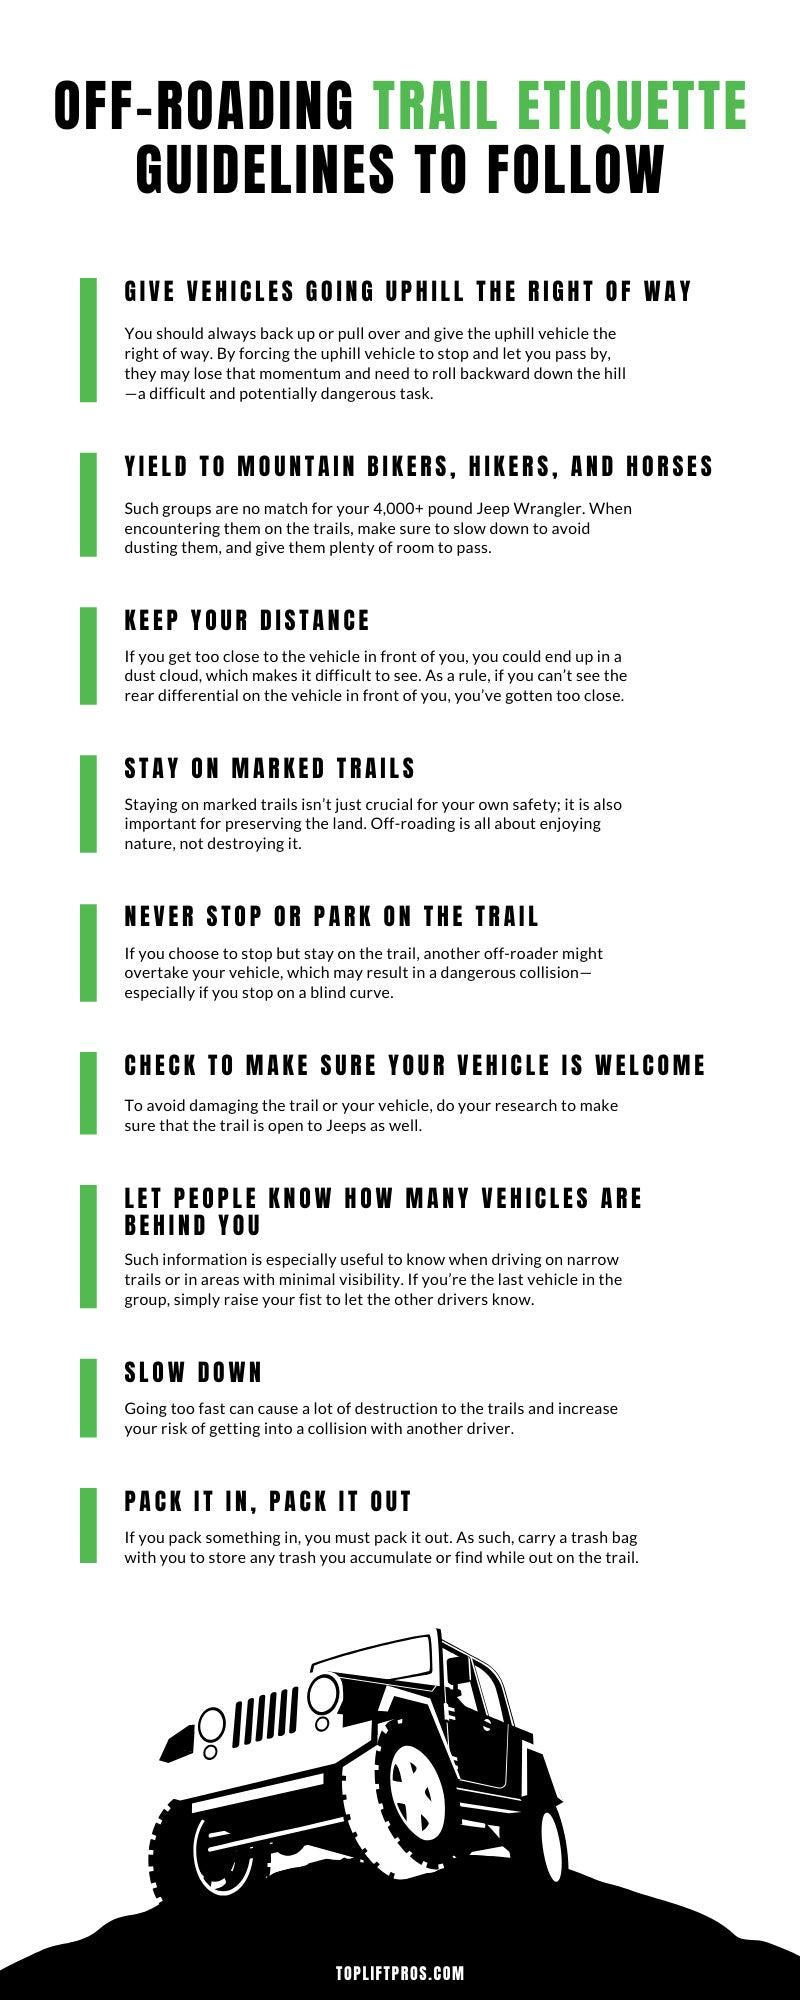 Off-Roading Trail Etiquette Guidelines to Follow